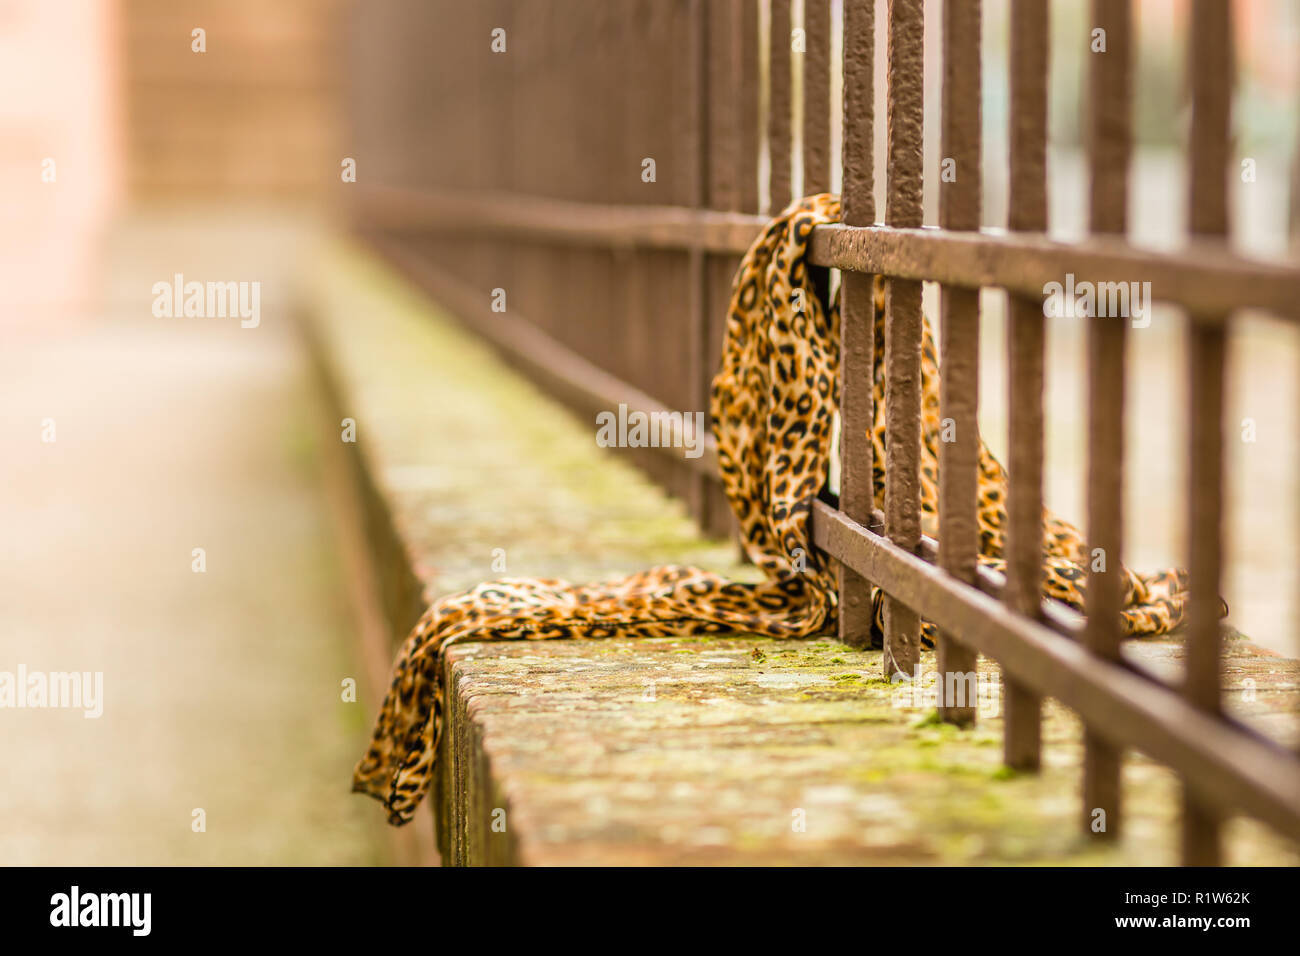 Leopard scarf left on an ancient iron railing Stock Photo